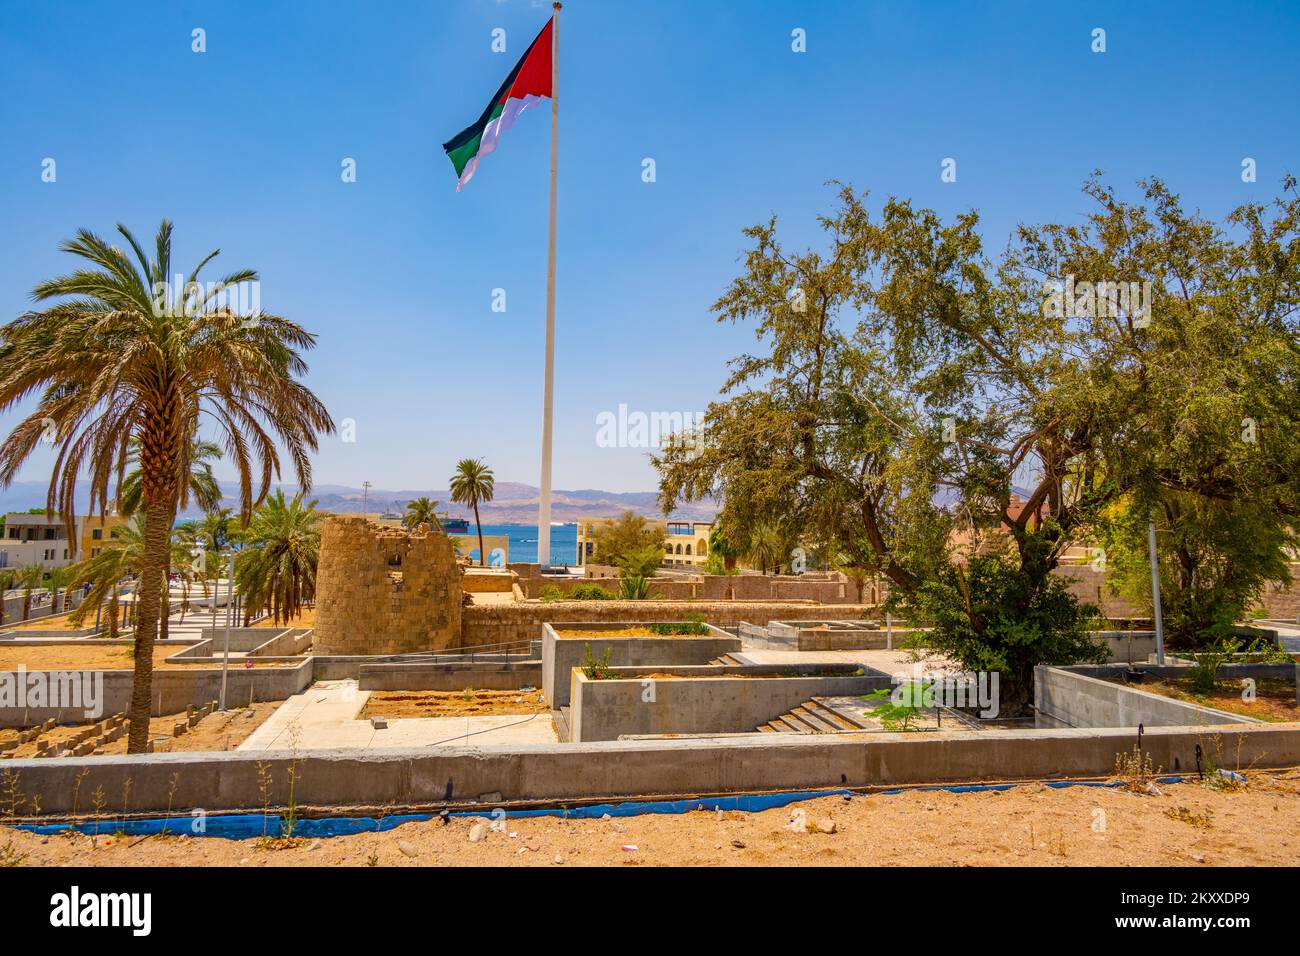 The Aqaba Fortress ruins with the Arab revolt flagpole in Background Stock Photo